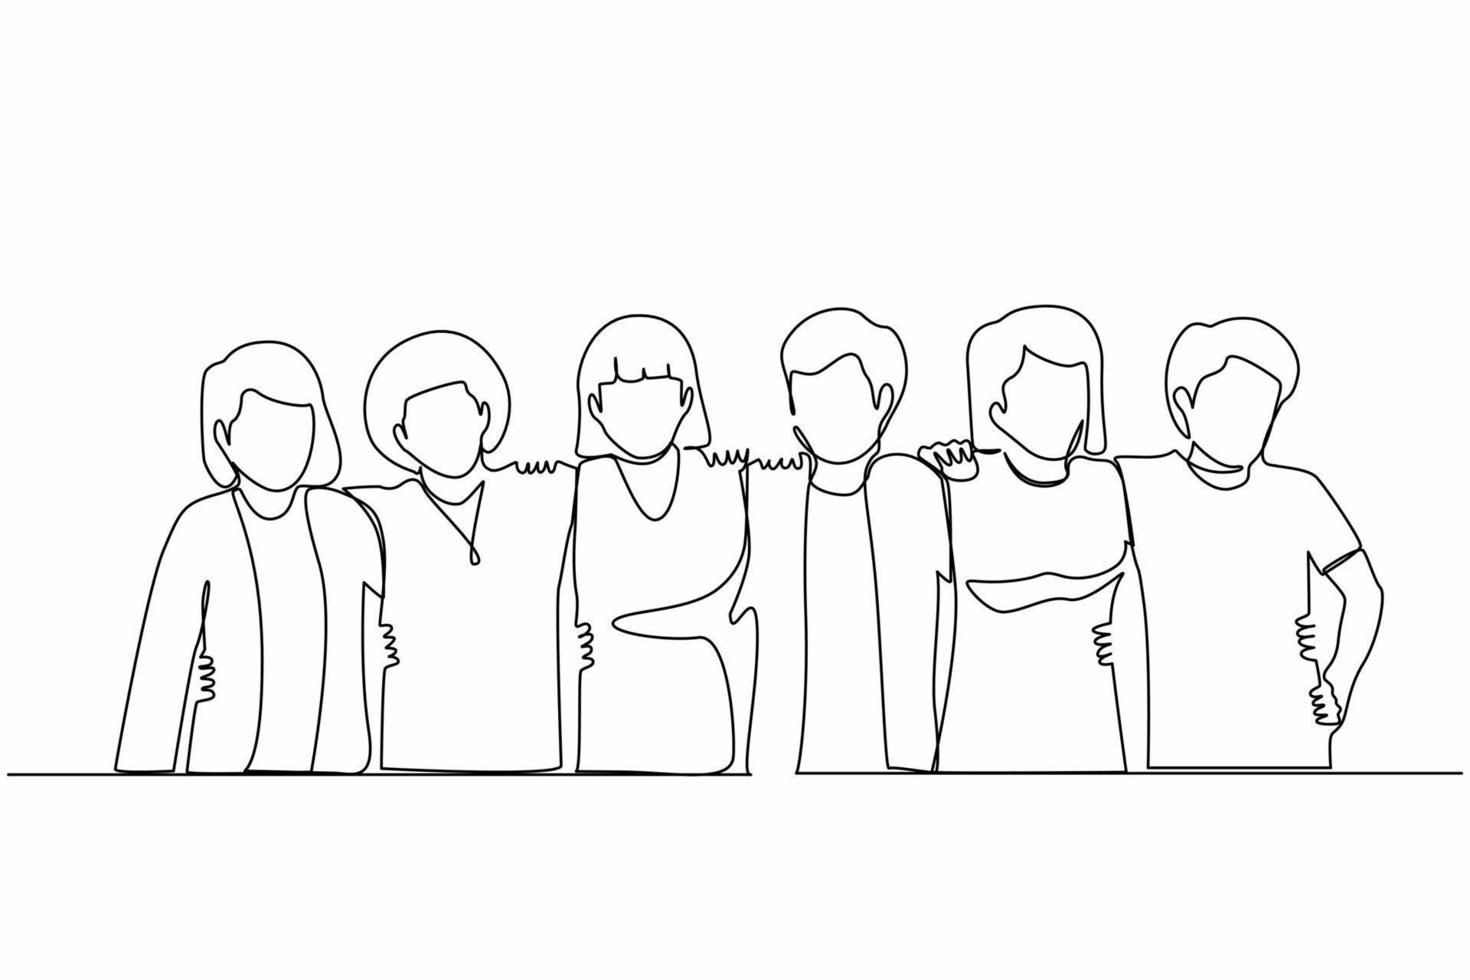 Continuous one line drawing friends forever. Hugging happy friendship with boys and girls standing together. Group of friends, men and women good relationships. Single line draw design vector graphic